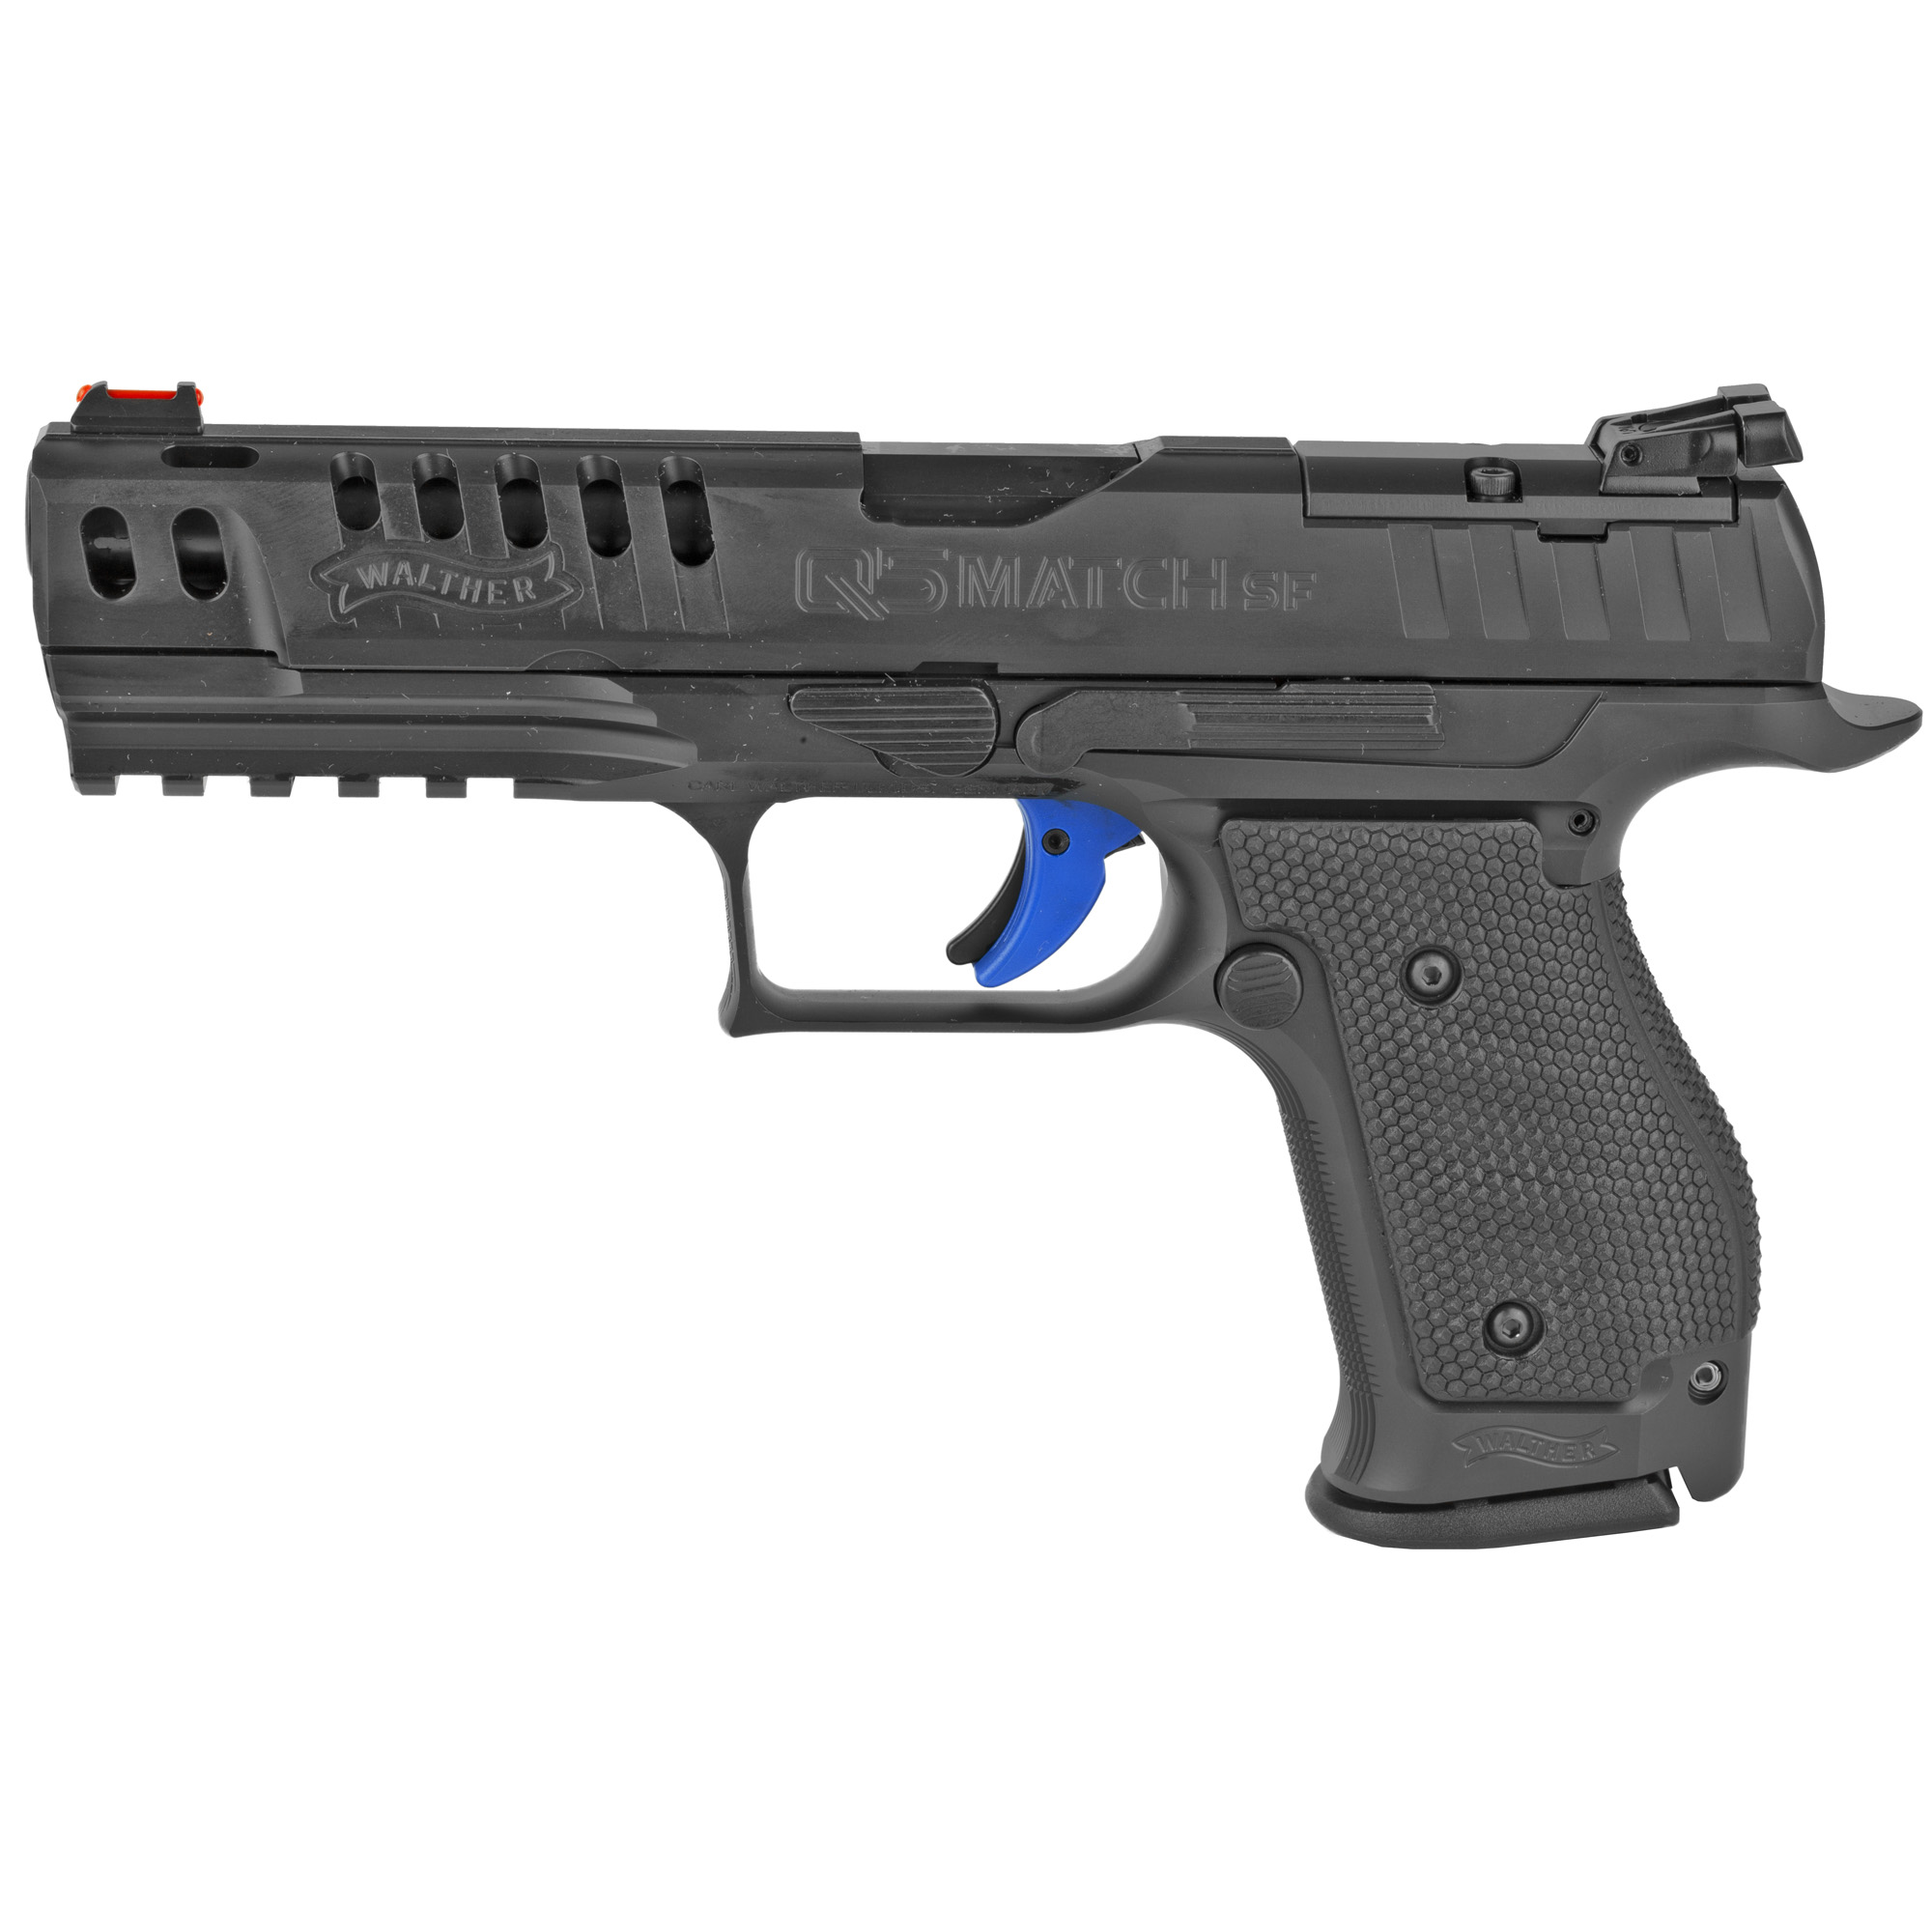 WALTHER Q5 MATCH SF 9MM 5 15RD BLK